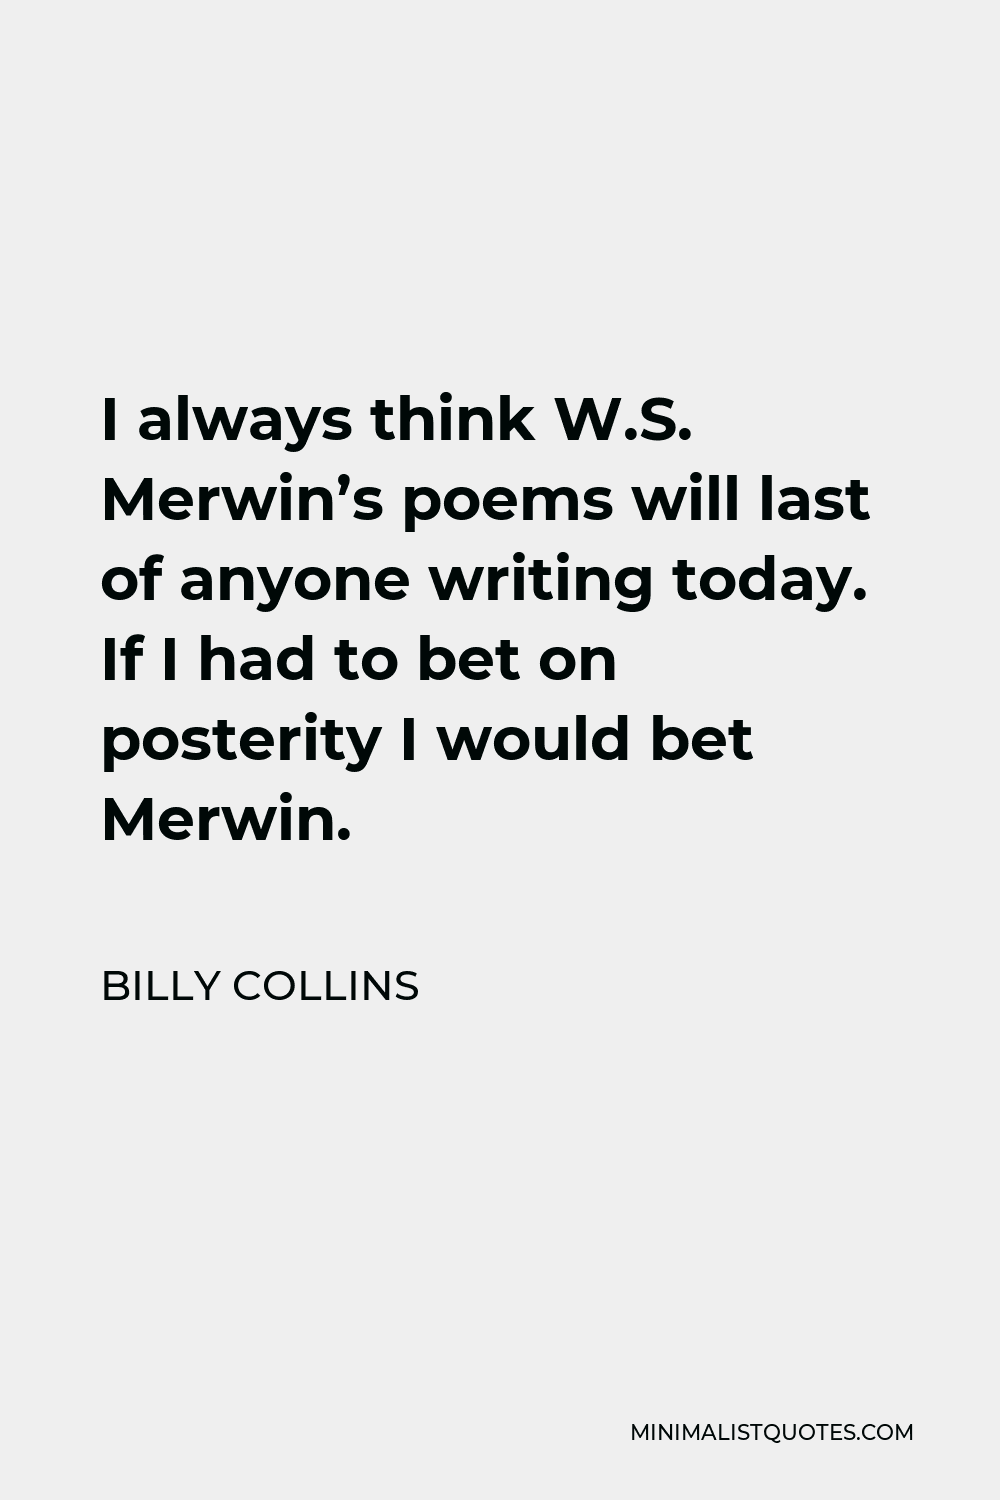 Billy Collins Quote - I always think W.S. Merwin’s poems will last of anyone writing today. If I had to bet on posterity I would bet Merwin.